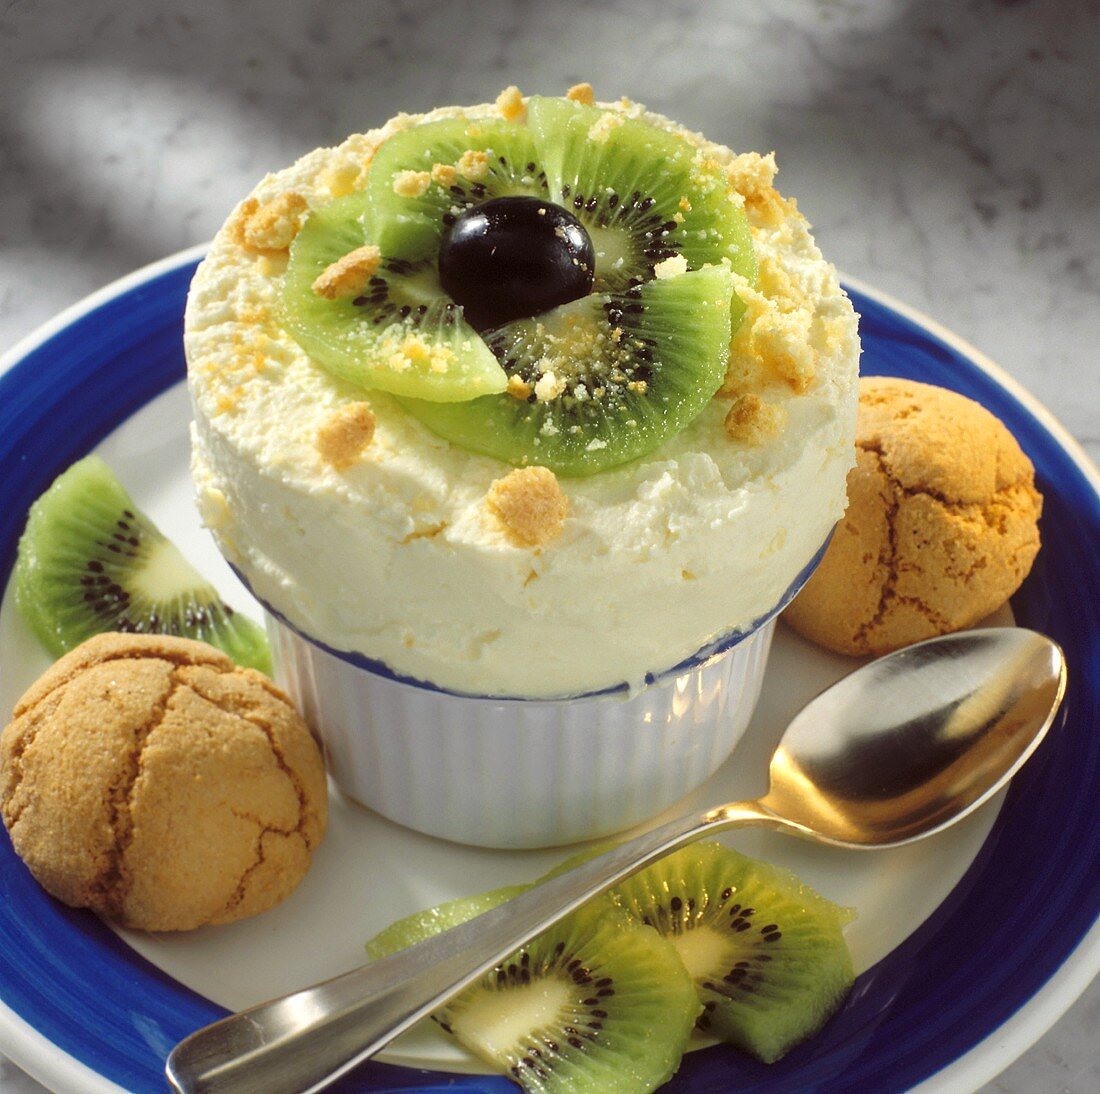 Ice cream souffle with kiwi slices, red grapes & biscuits